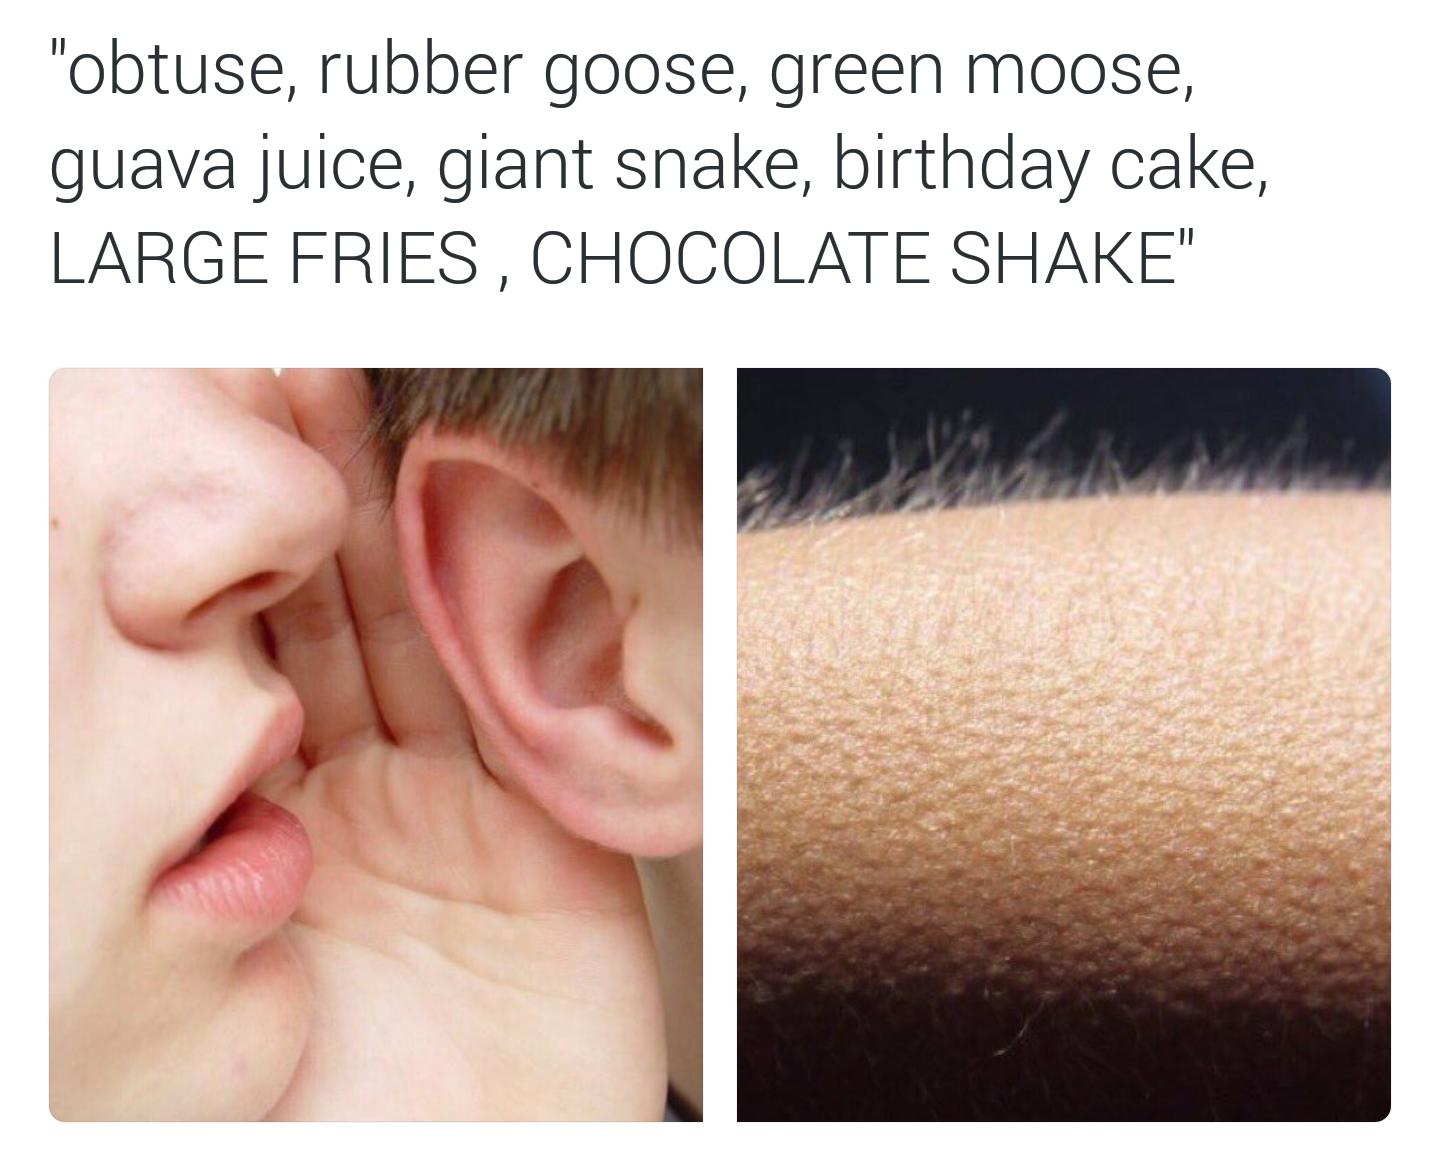 bumpy butt - "obtuse, rubber goose, green moose, guava juice, giant snake, birthday cake, Large Fries , Chocolate Shake"